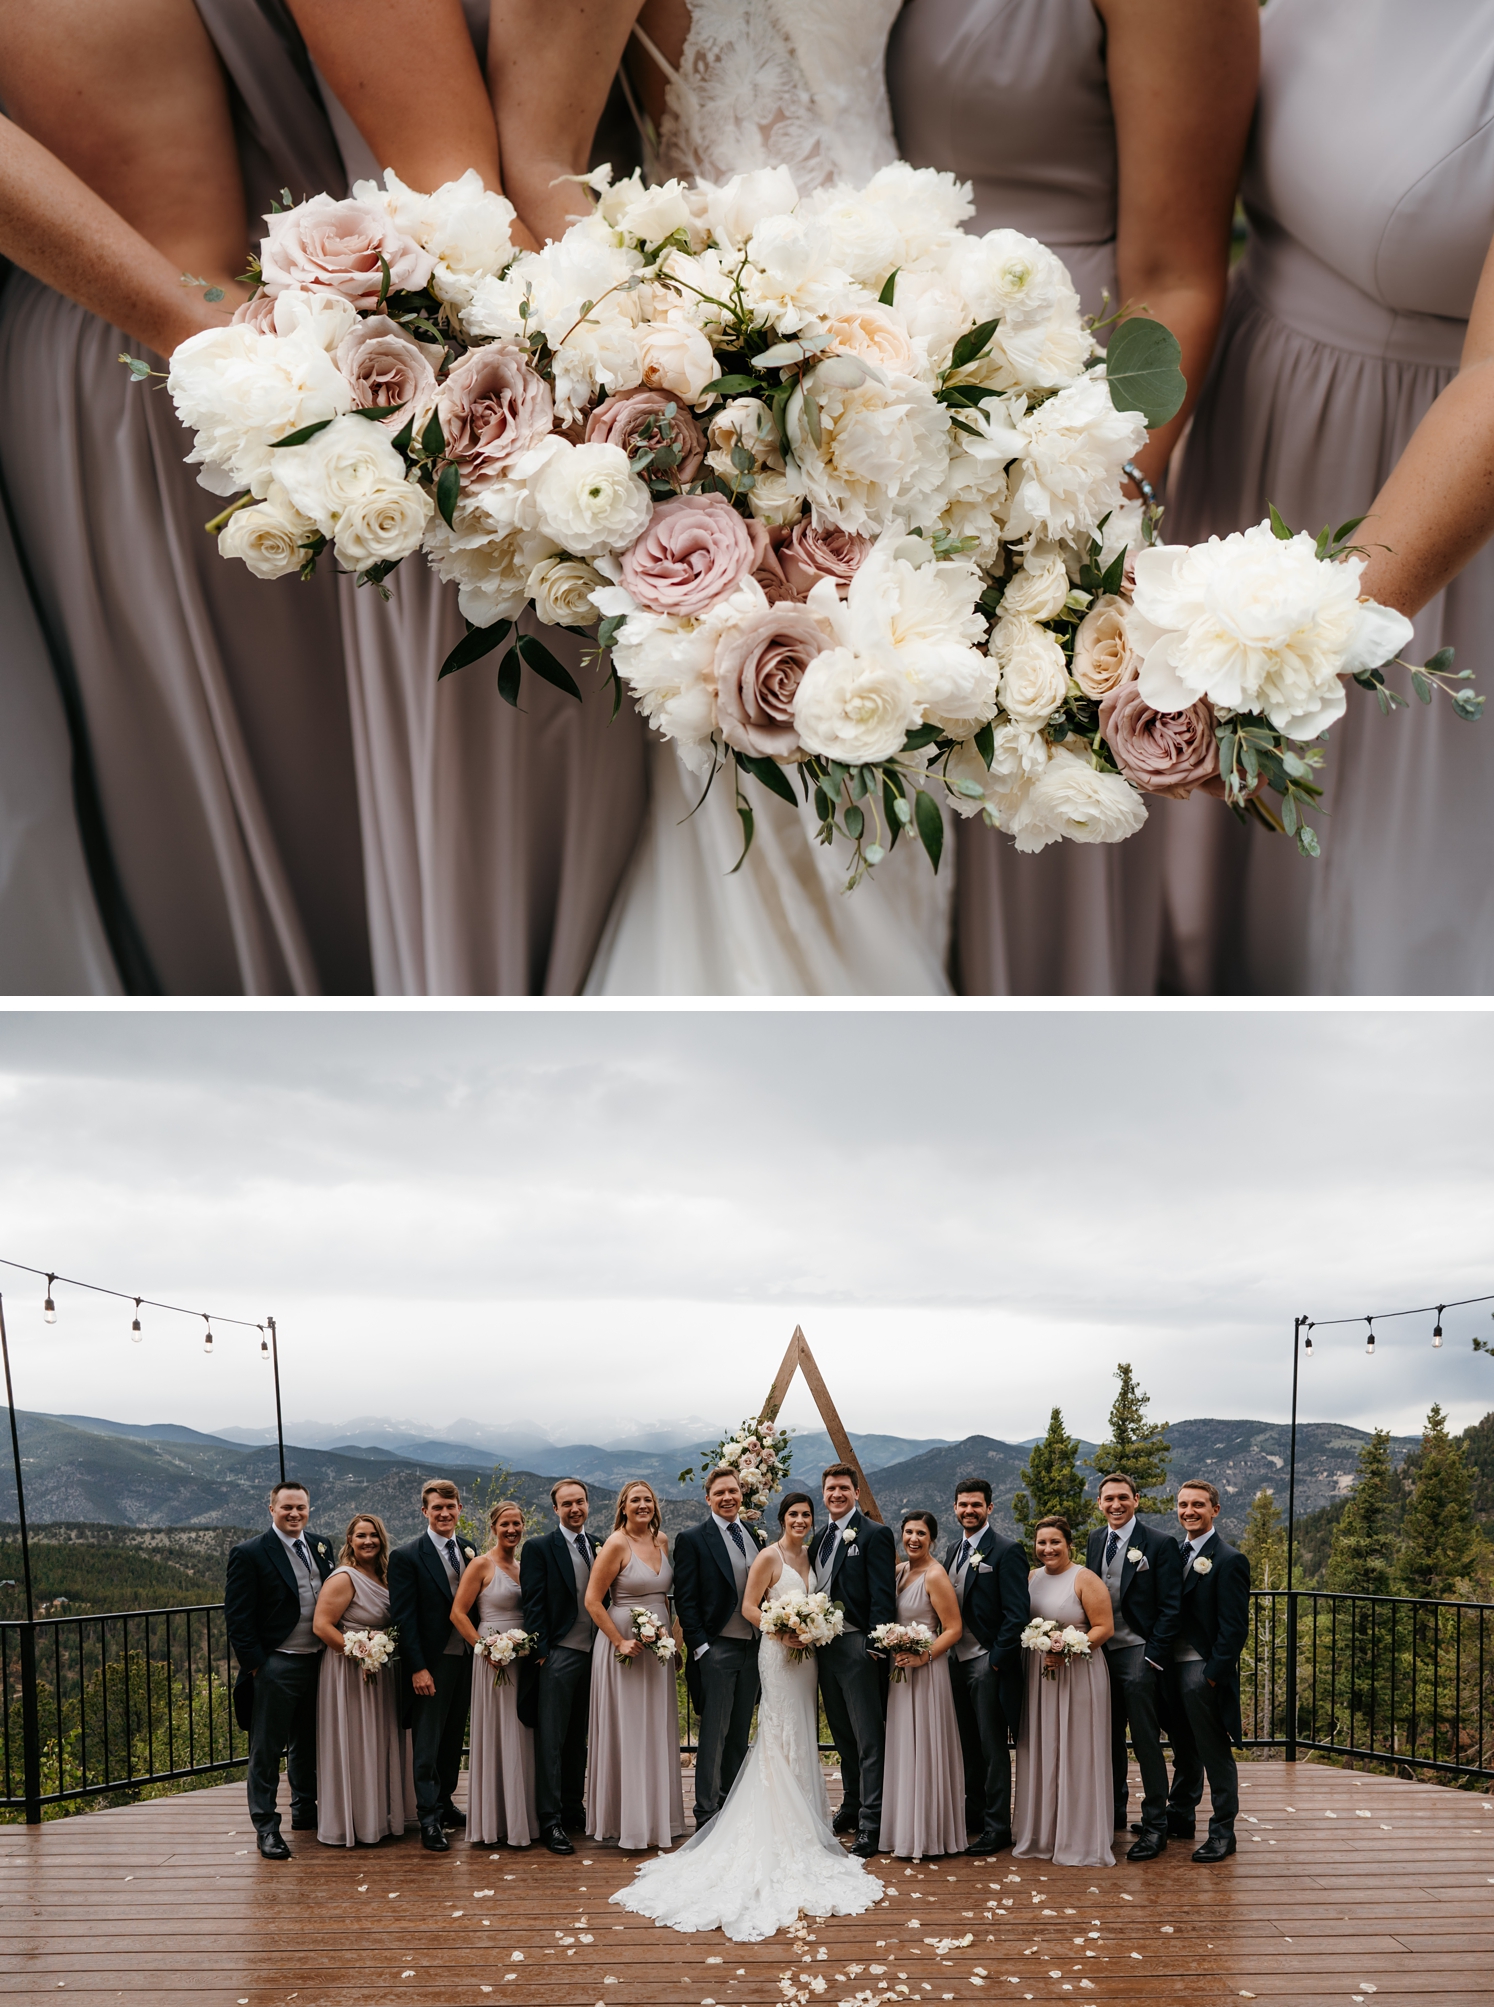 Bride and bridesmaids holding bouquets of white and pink peonies and roses | Wedding party standing on deck at North Star Gatherings wedding | McArthur Weddings and Events